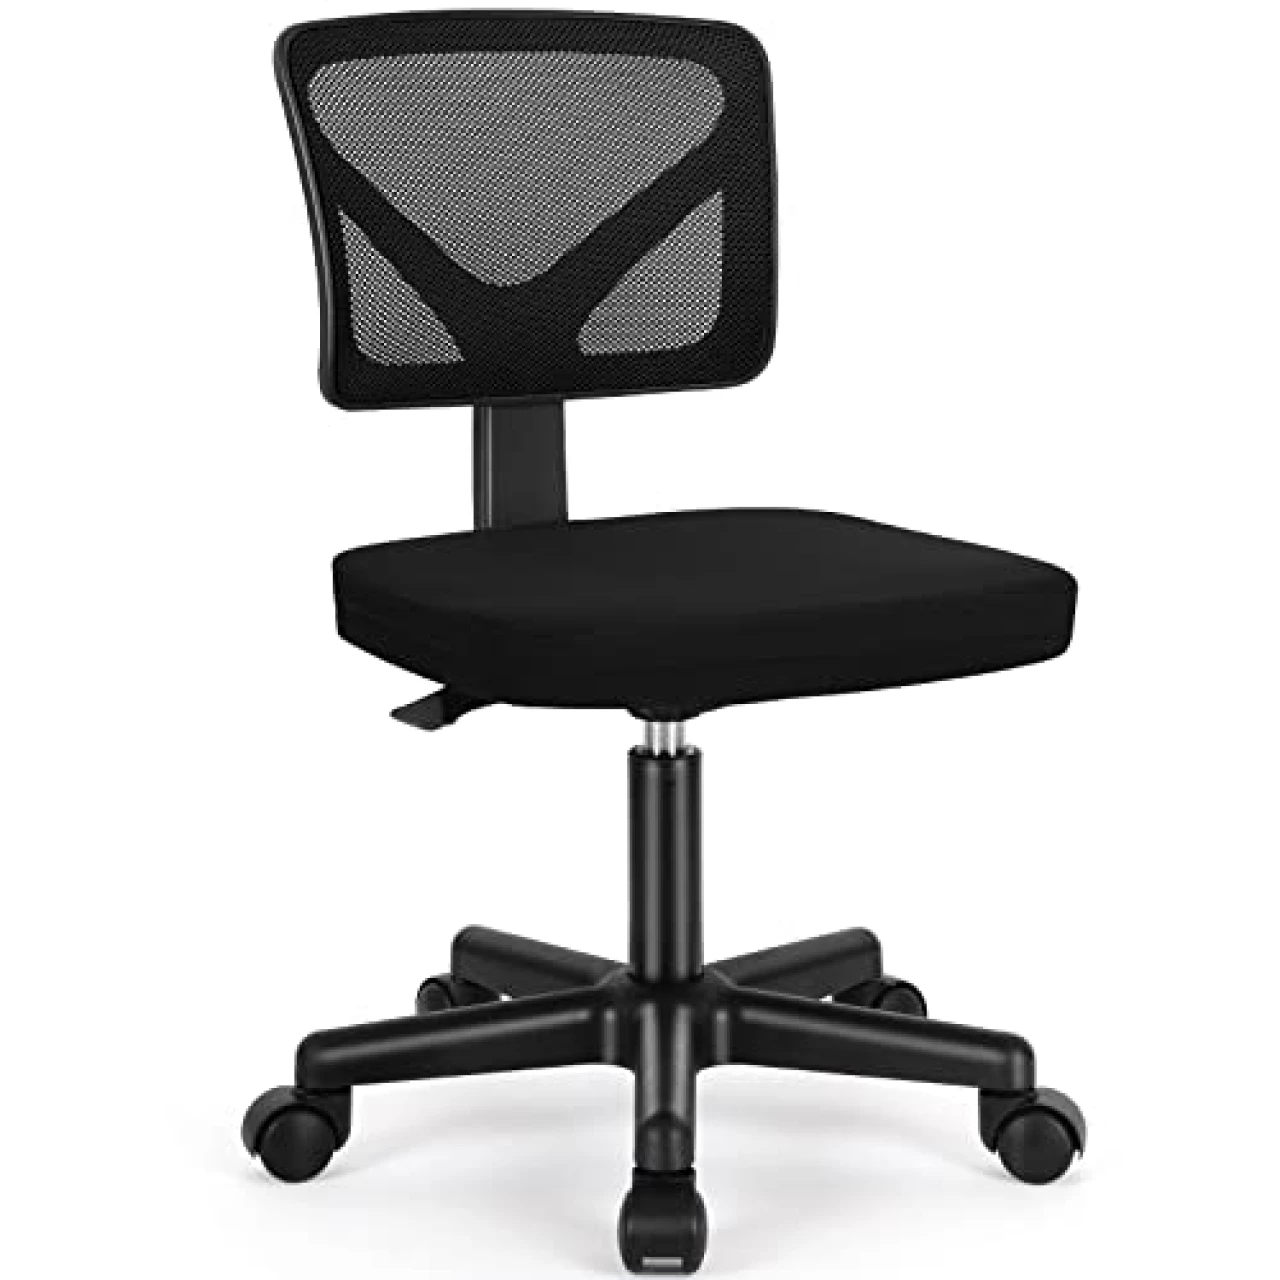 AFO Small Desk Chair Armless with Ergonomic Lumbar Support, Adjustable Height Breathable Mesh with Backrest, 360 Degree Swivel Rolling, for Study, Office, Conference Room, Black